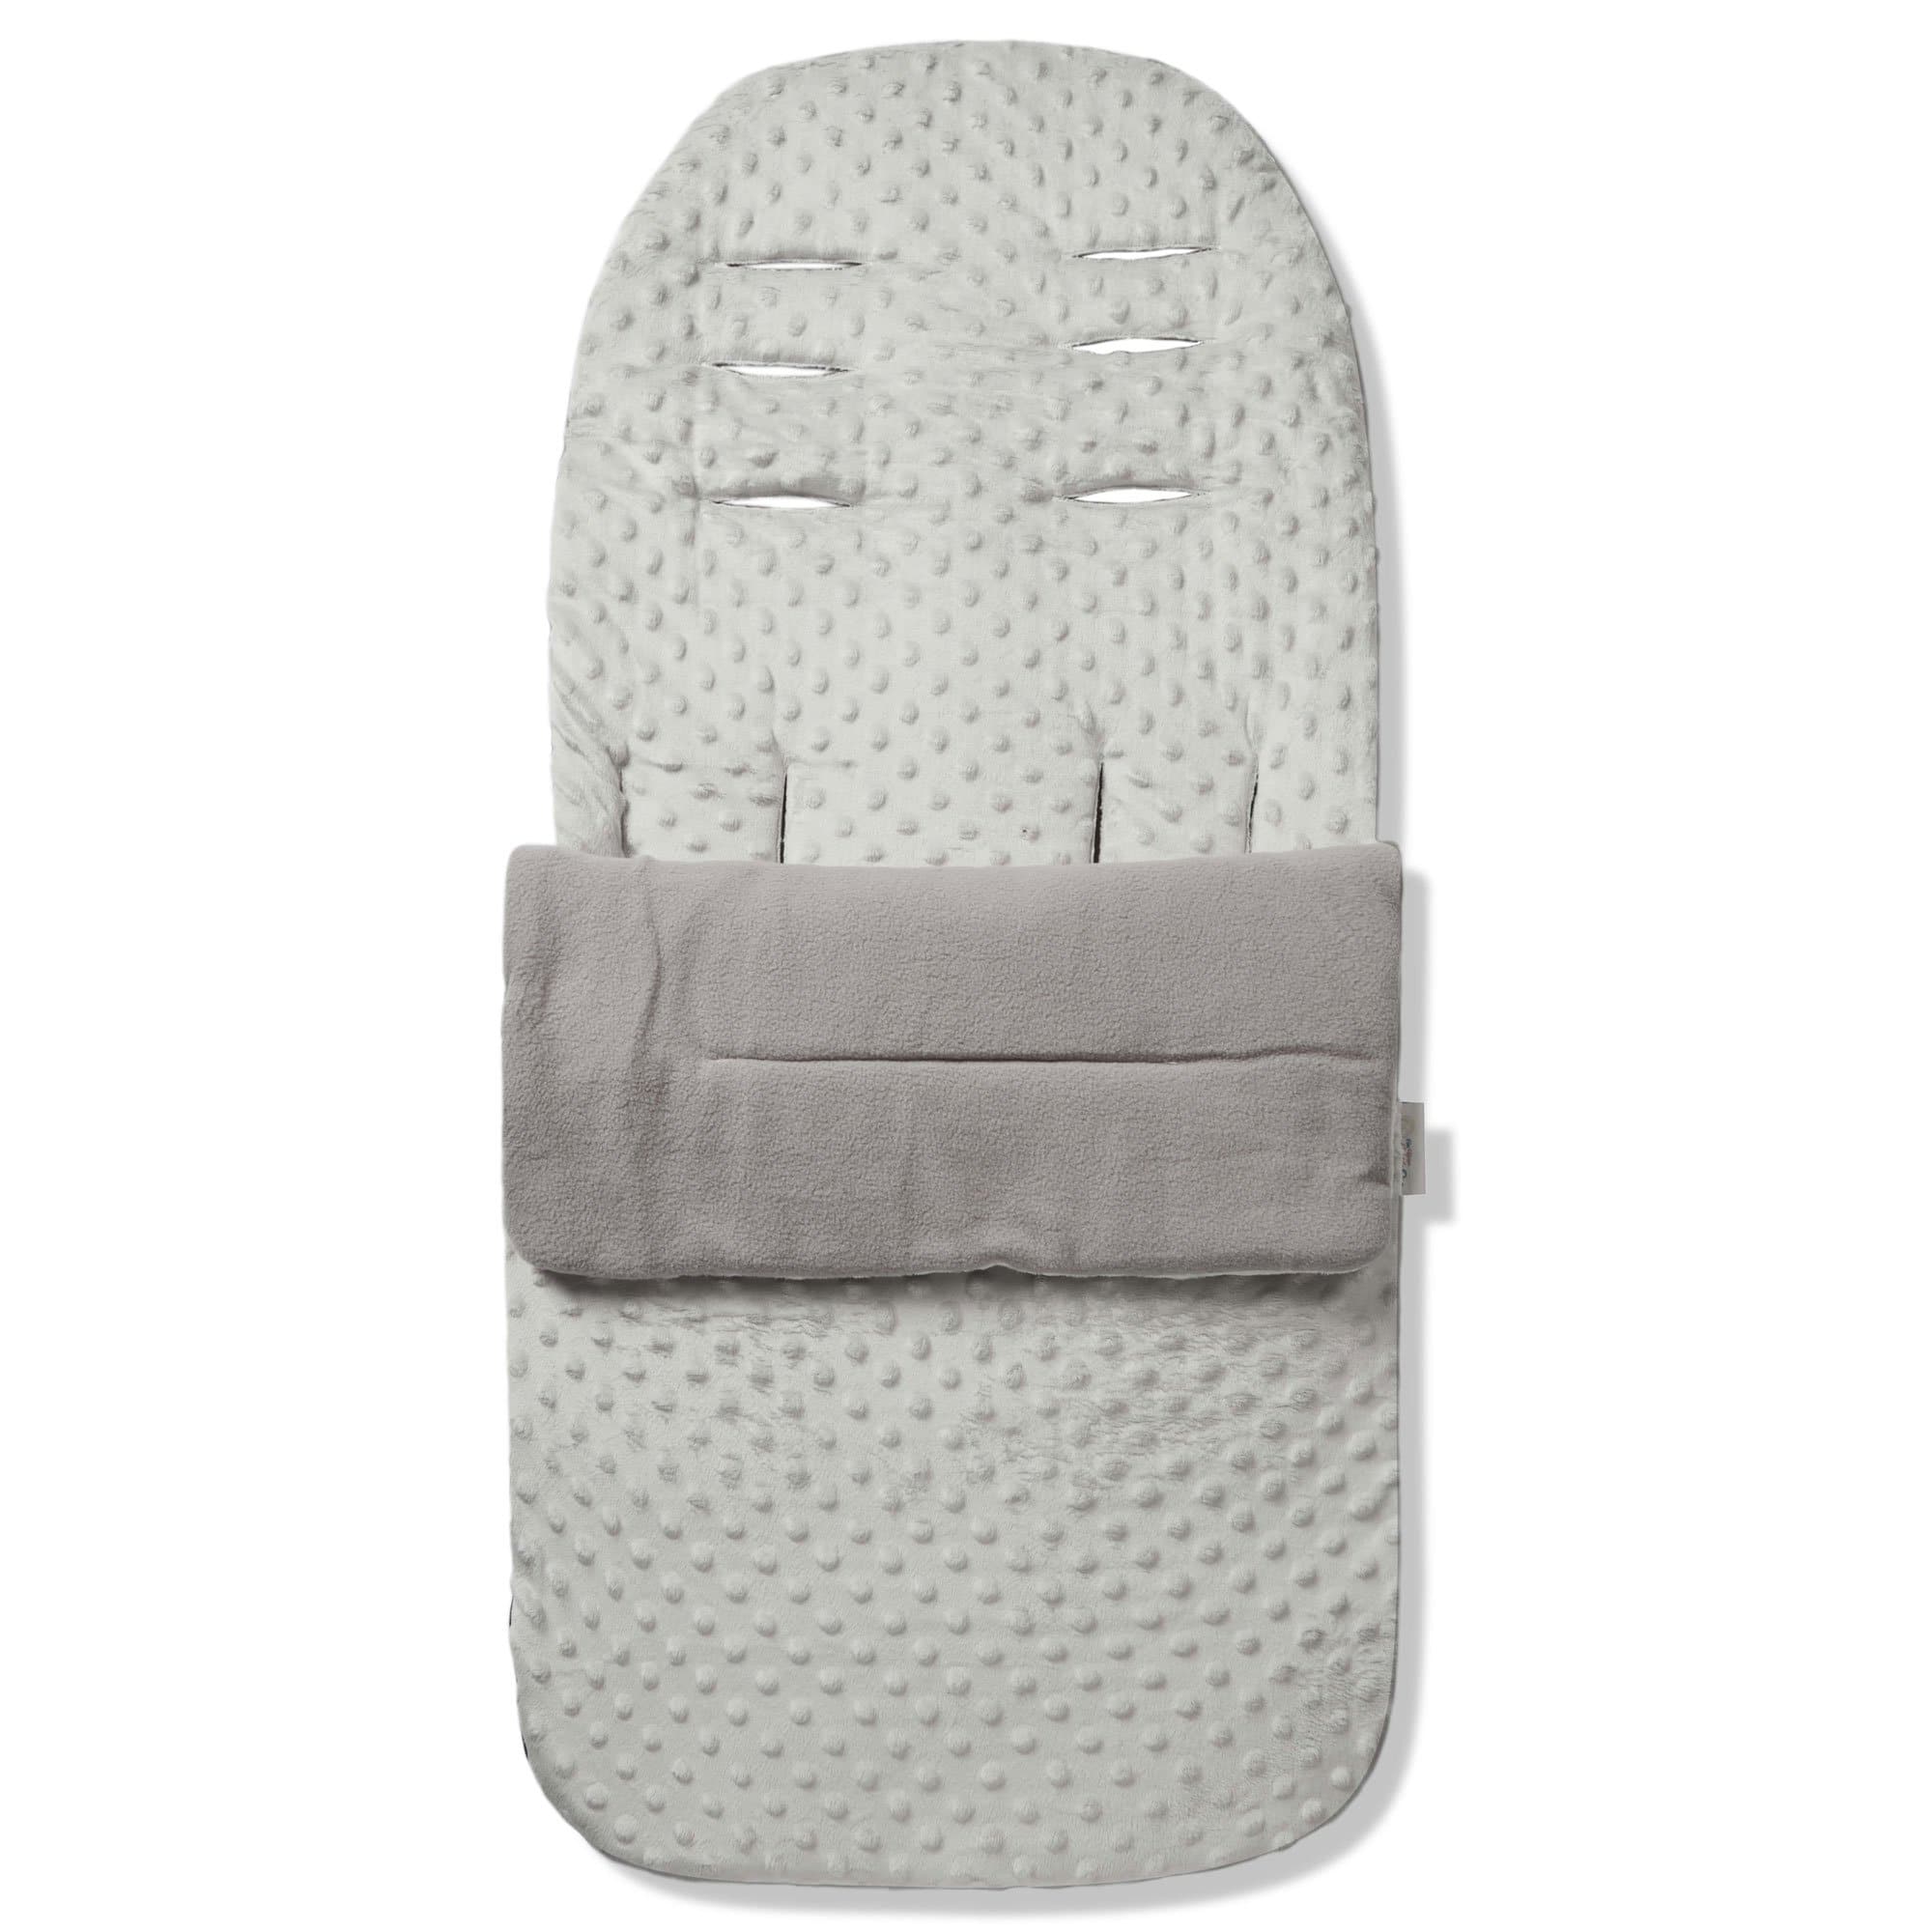 Dimple Footmuff / Cosy Toes Compatible with Bloom - For Your Little One